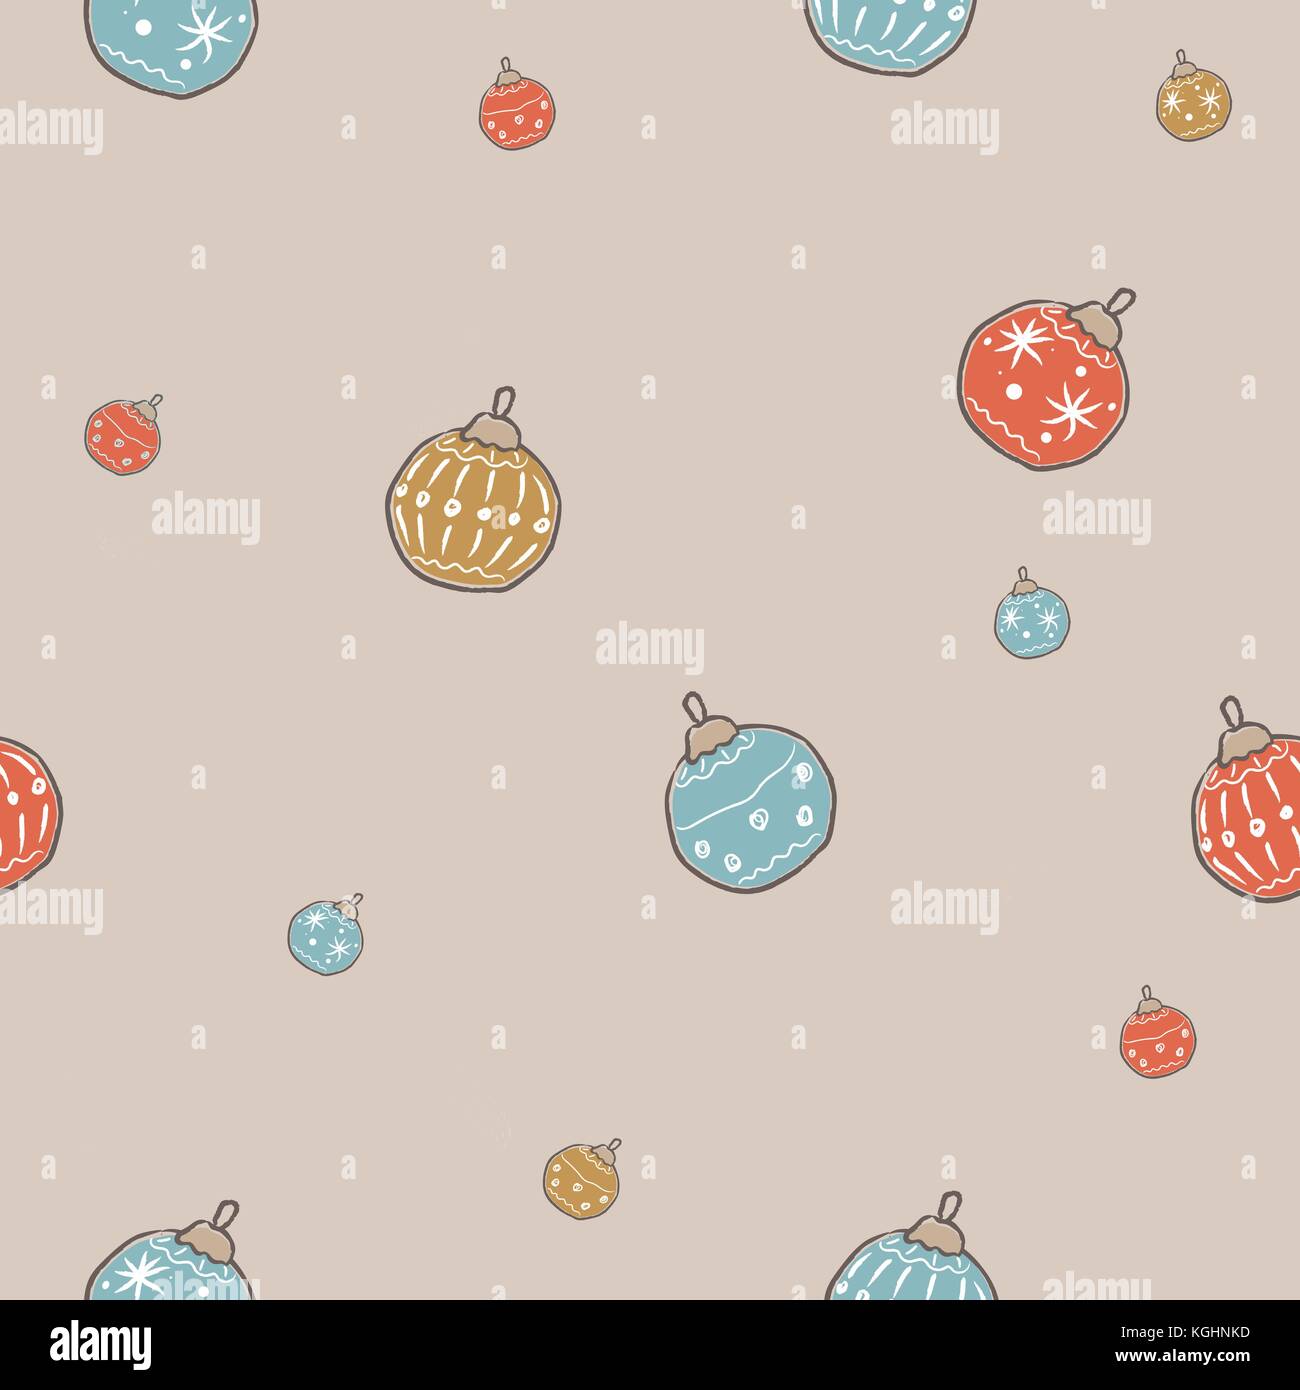 Winter Seamless Pattern with festive ornaments on subtle background. Great For swatches, fabric, wrapping/gift paper, wall art design, etc. Vector Ill Stock Vector